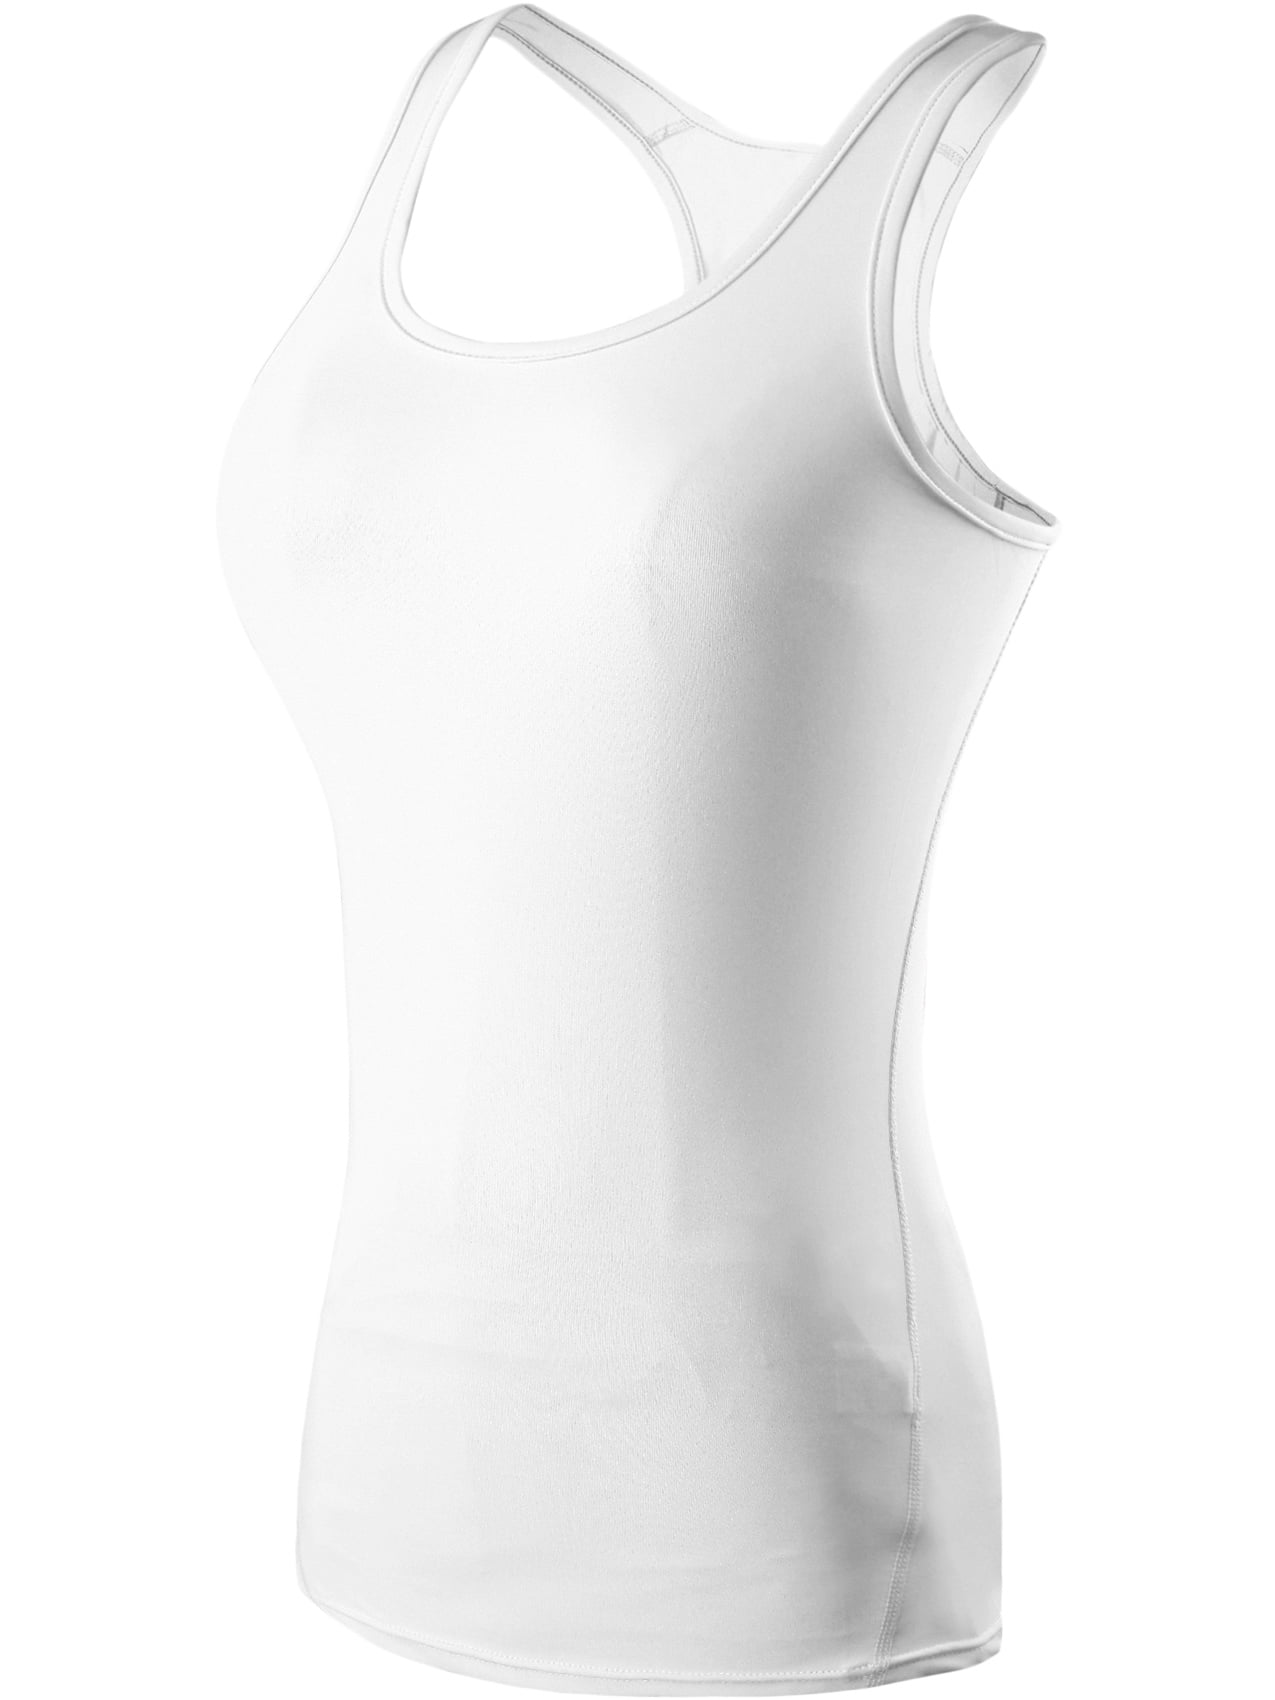 NELEUS Womens Layer Tank Dry Fit Size White,US XS Compression Base 3 Pack,Black+Gray+ Top